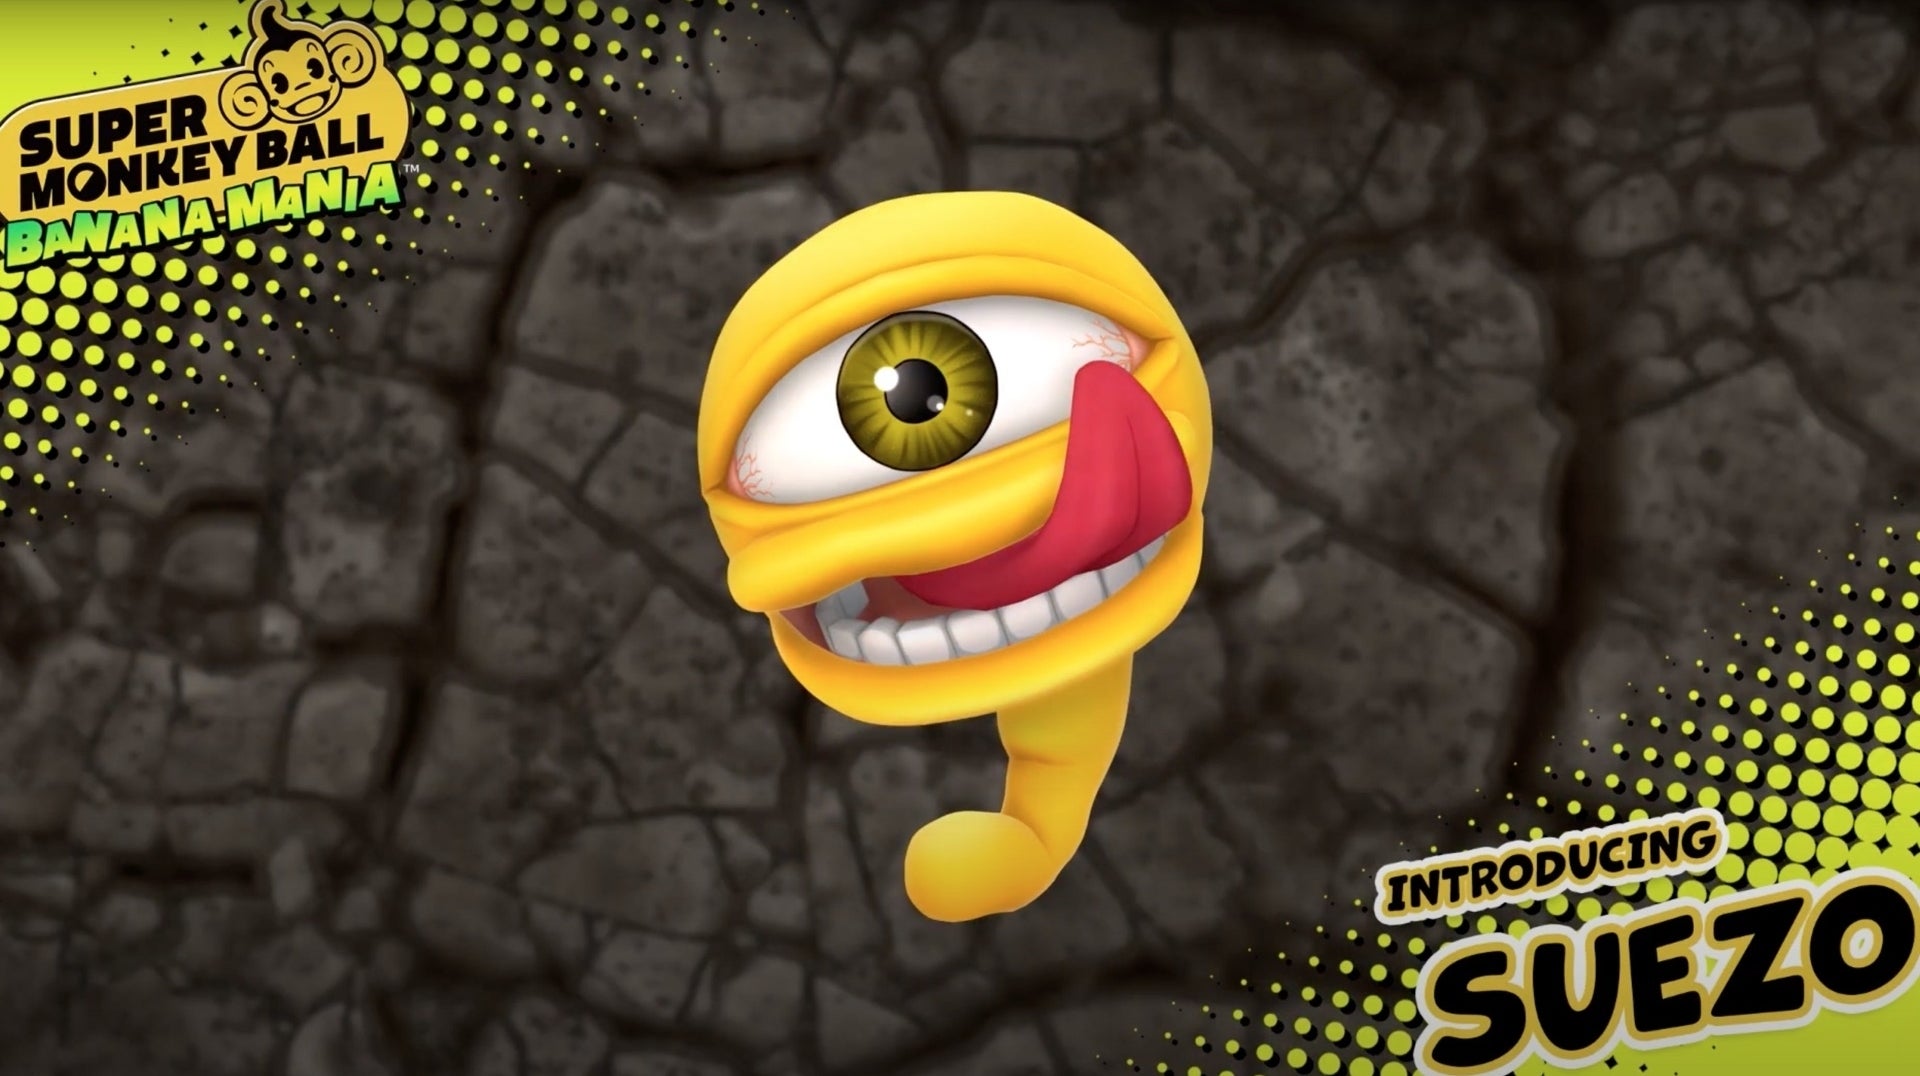 Image for Monster Rancher's Suezo is also paid DLC for Super Monkey Ball: Banana Mania